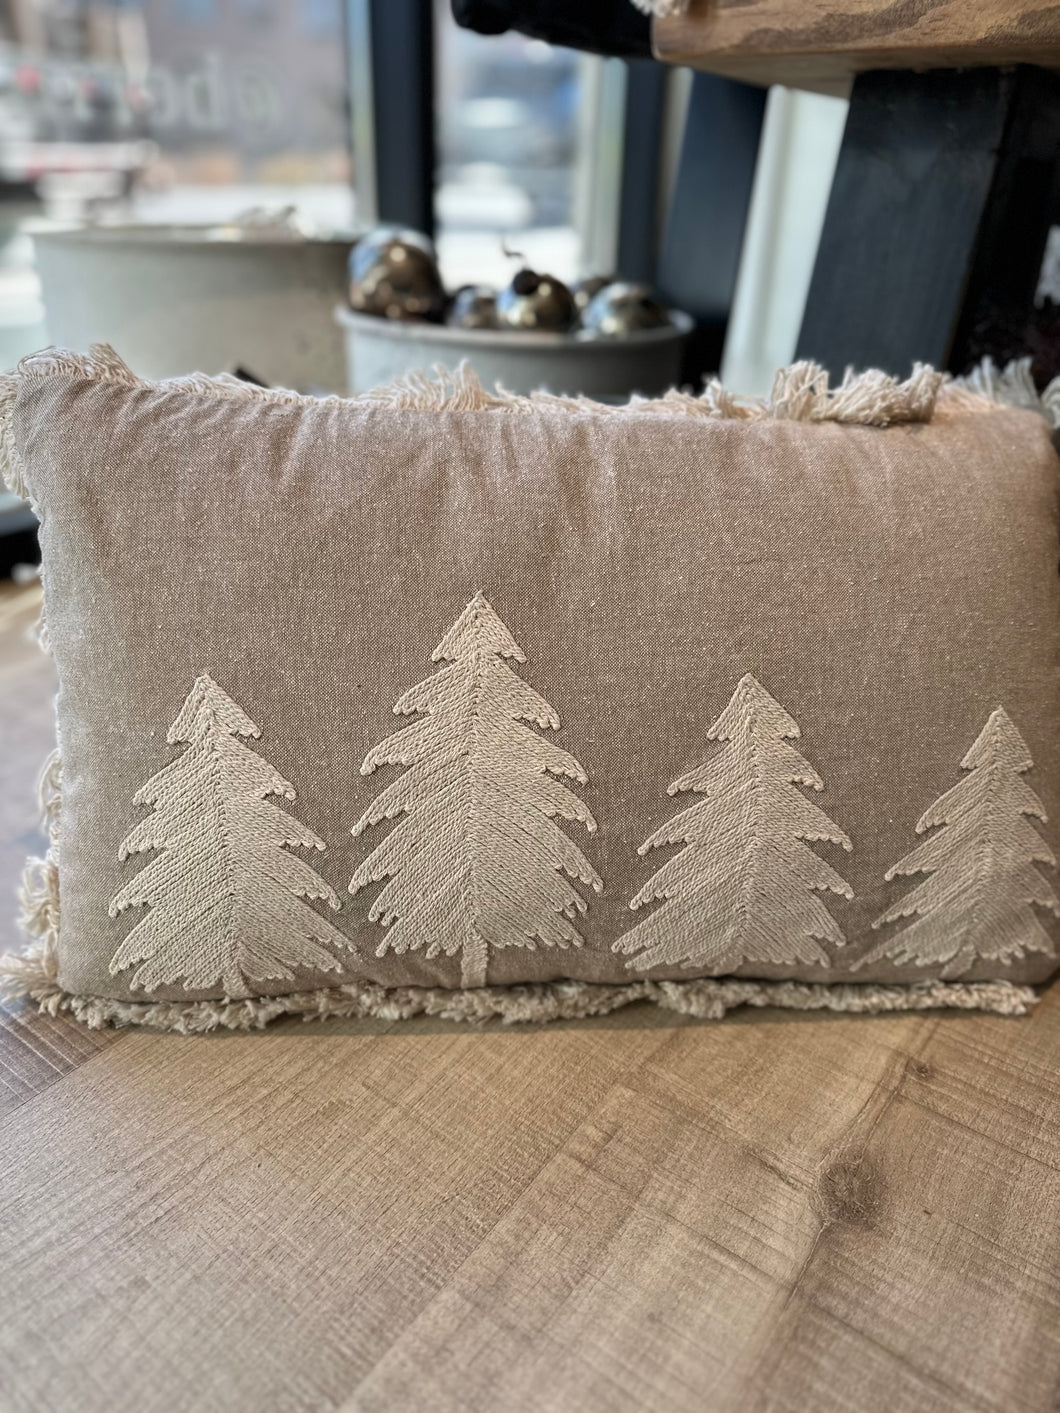 A cozy beige Christmas tree pillow with cream-colored Christmas trees on the front. The pillow is also adorned with lines of cream-colored fringe.